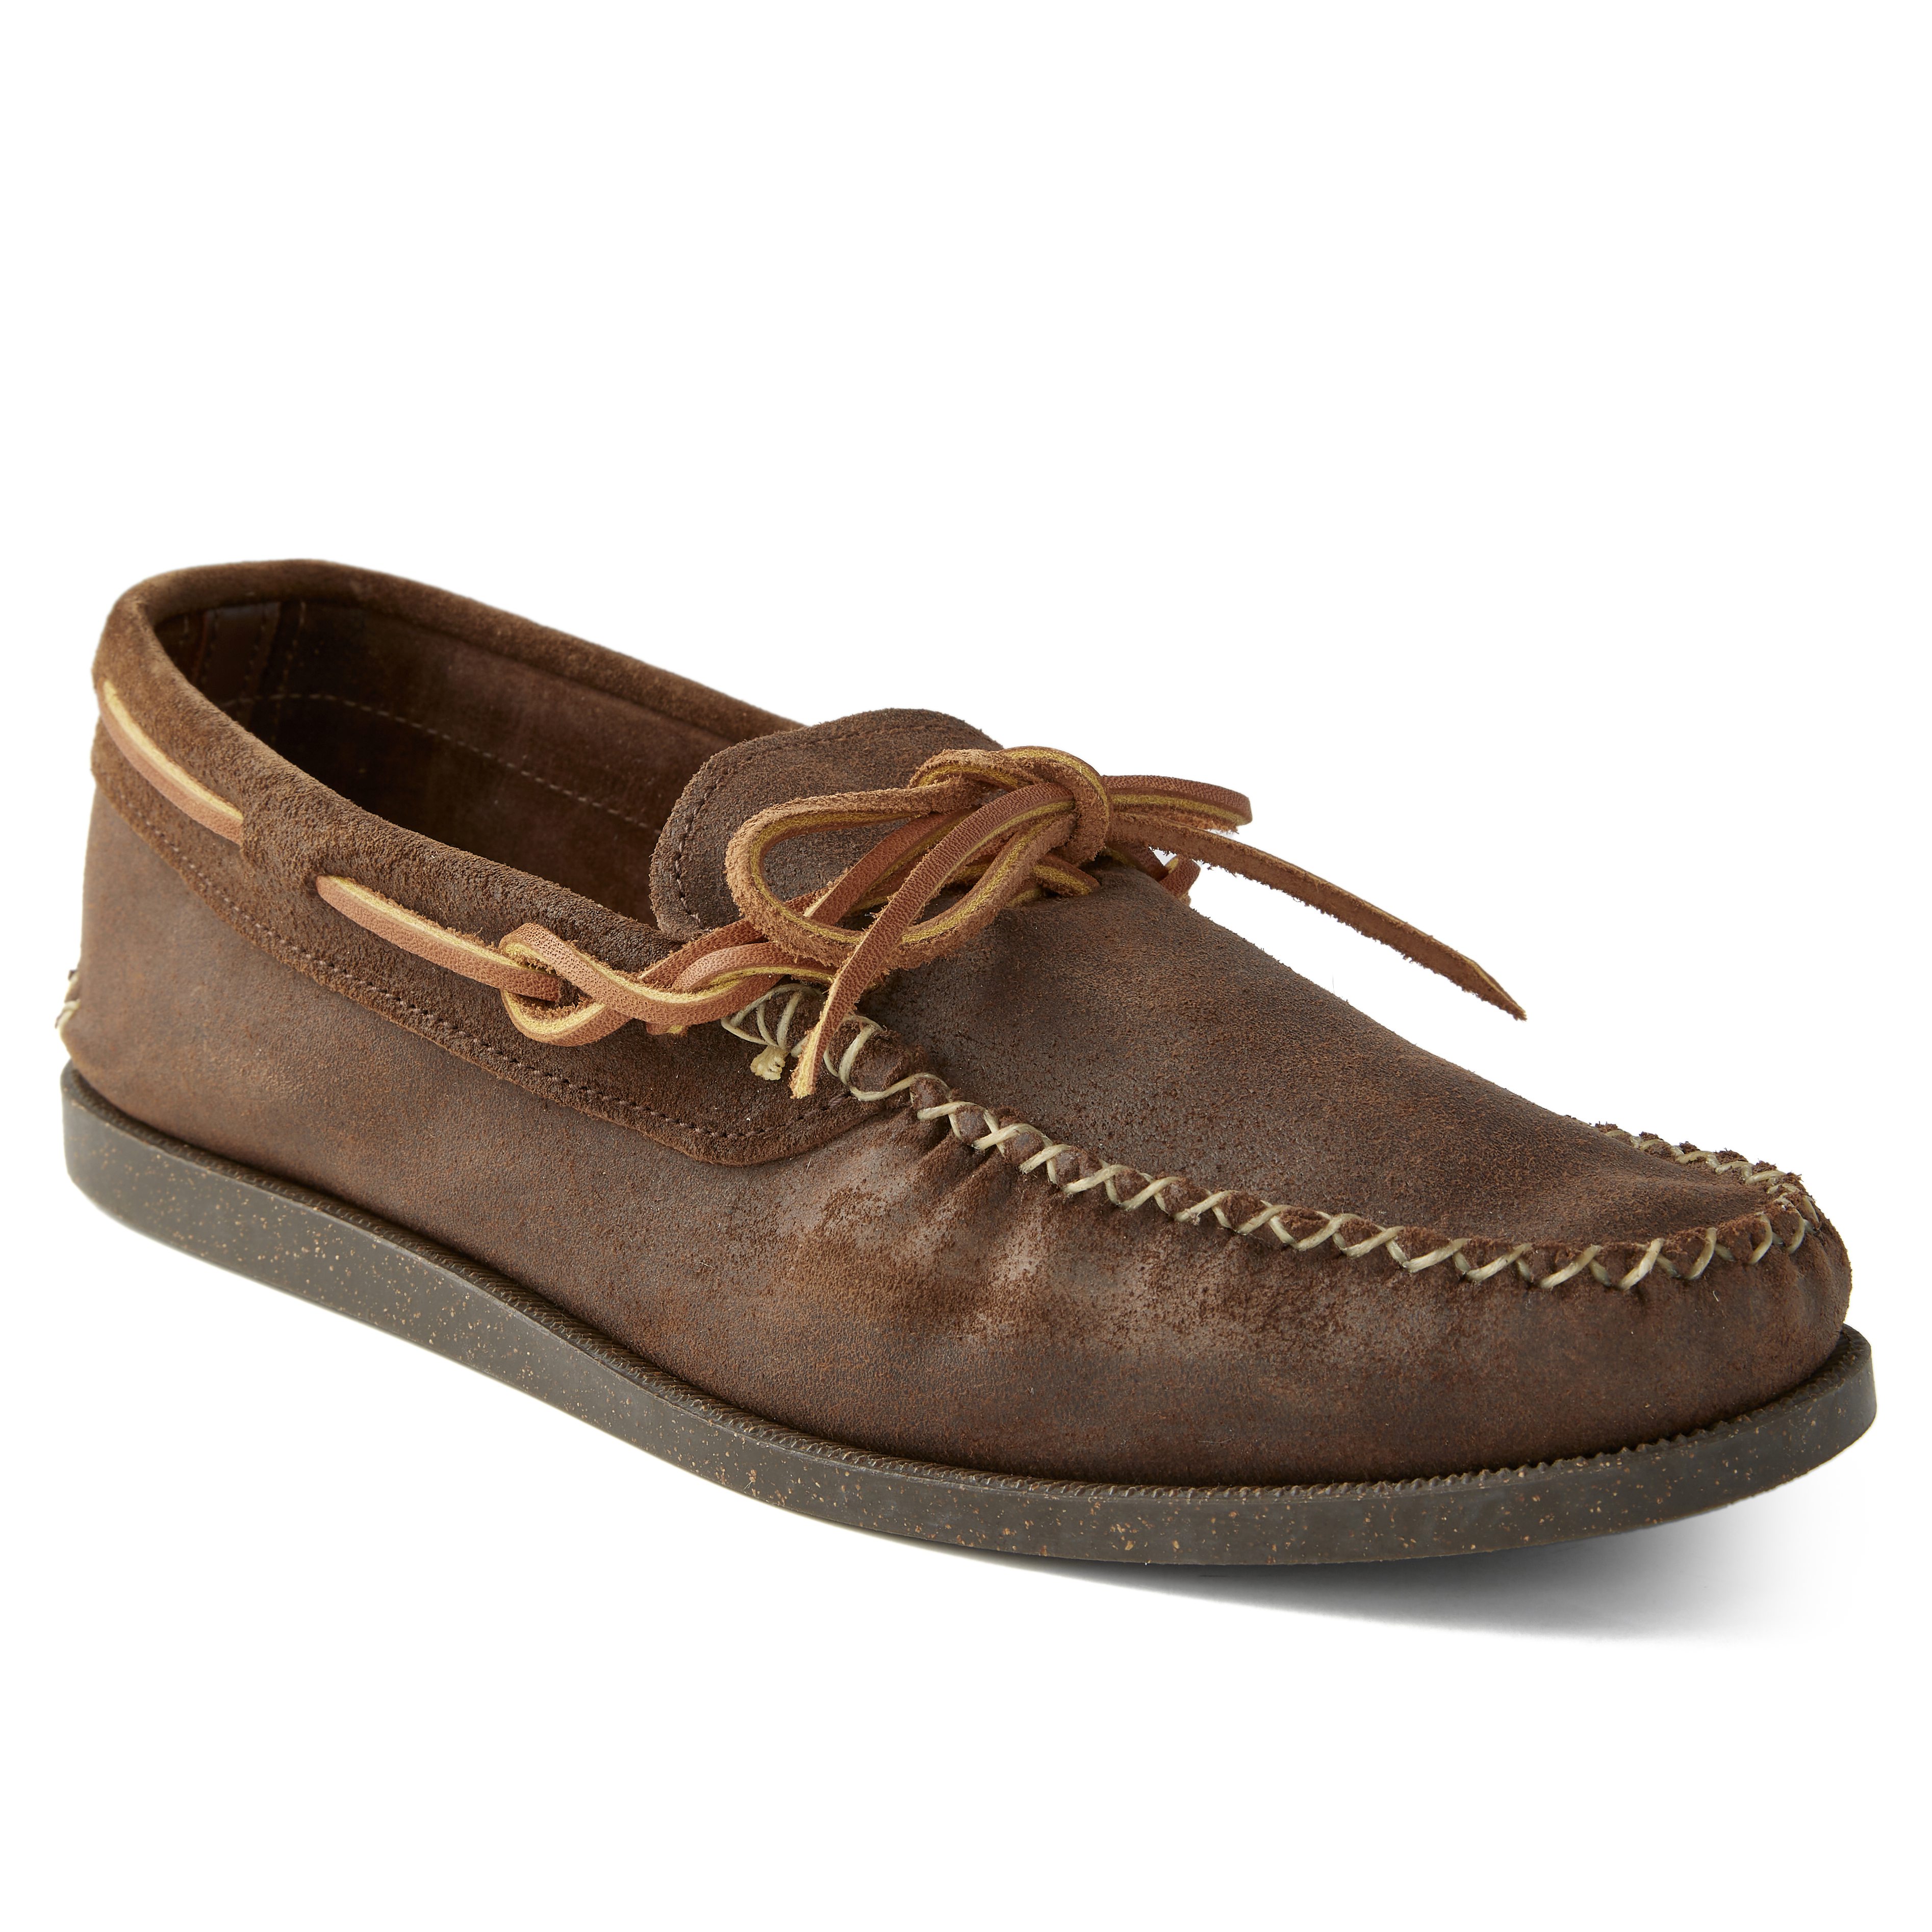 Yuketen Canoe Moc with Camp Sole - Exclusive - Torrance ...